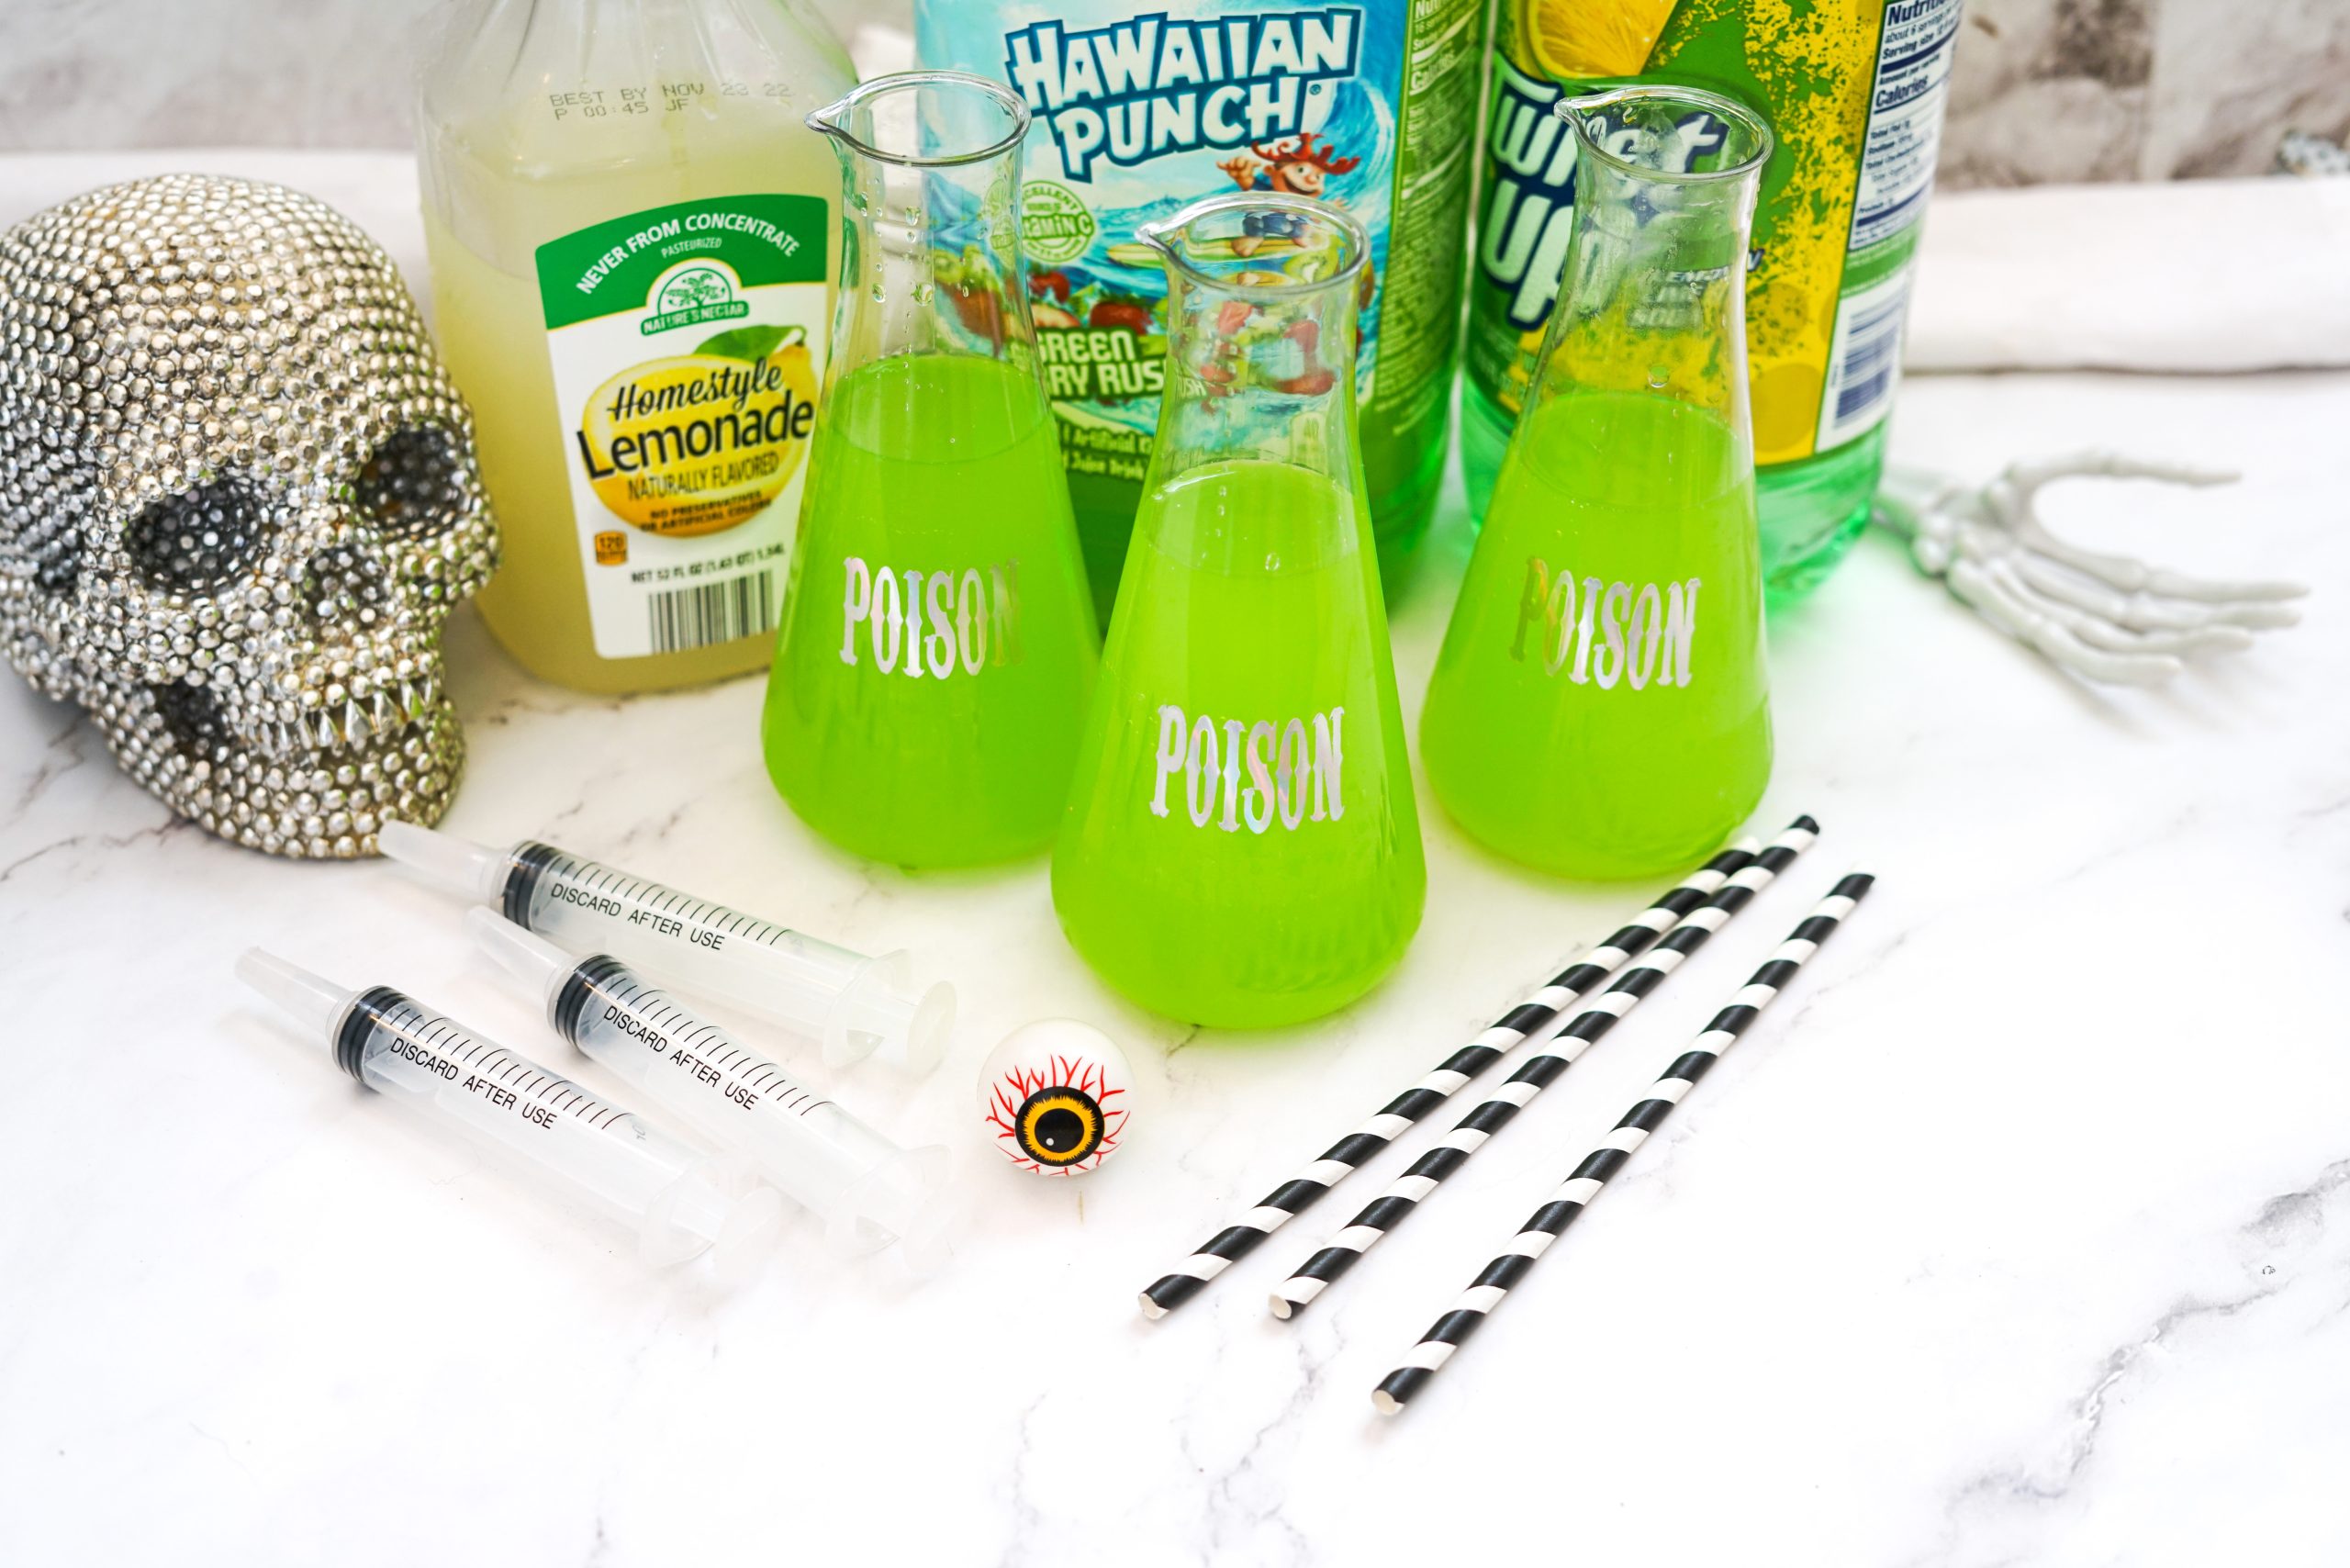 dollar store "poison" beakers filled with green halloween punch near plastic novelty syringes